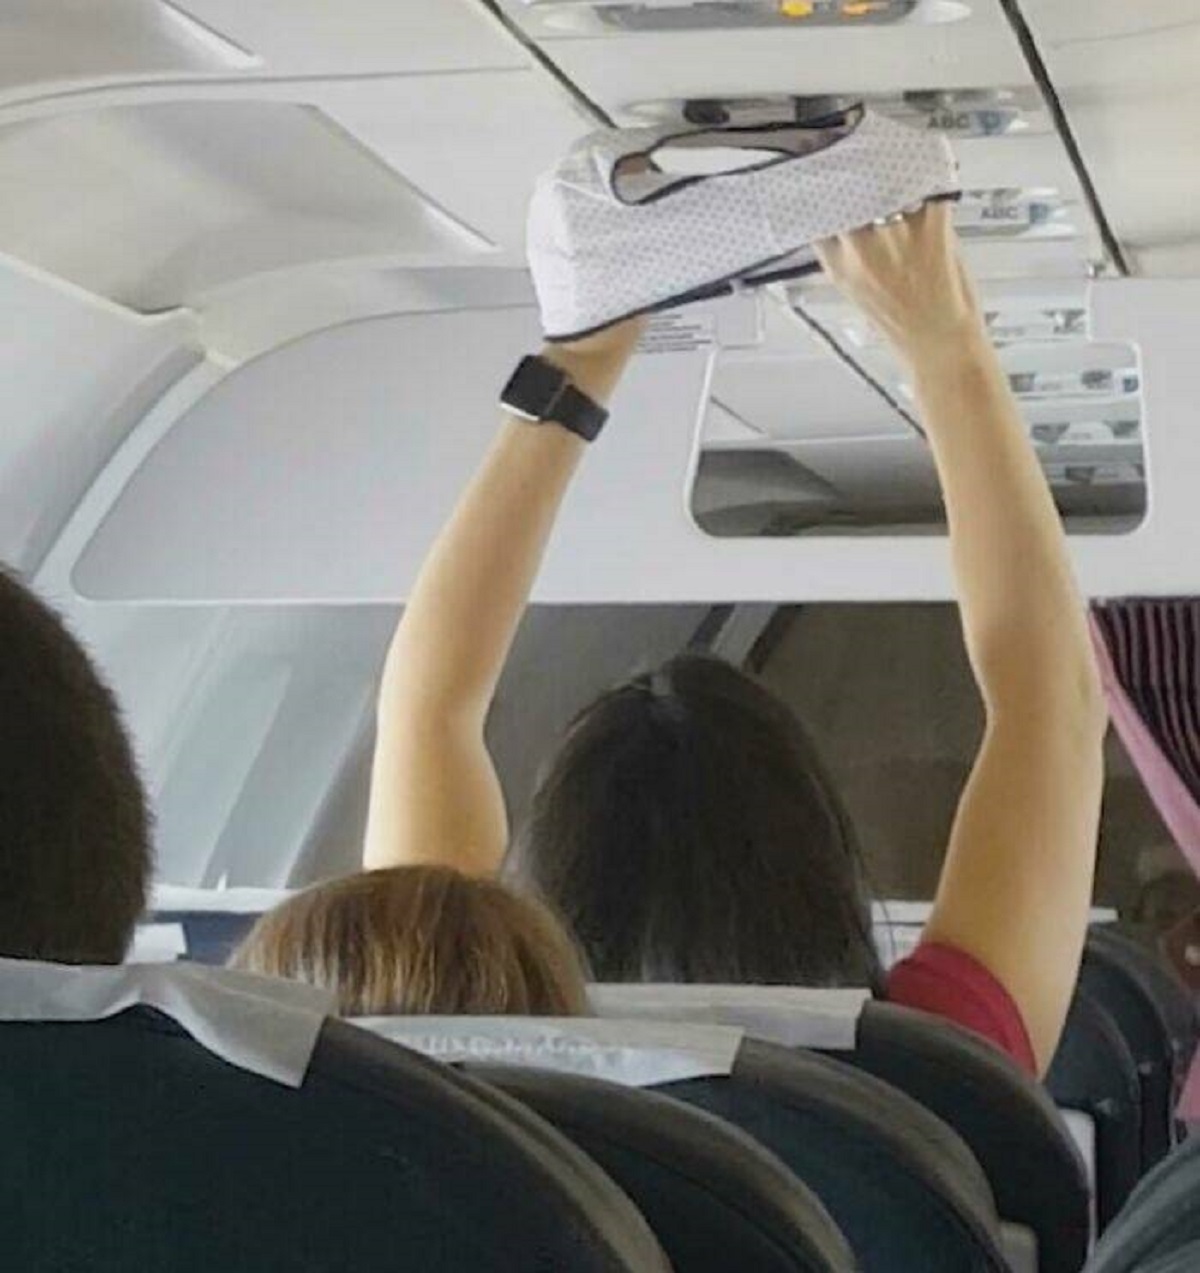 "Drying The Undies In Front Of The Plane's AC"